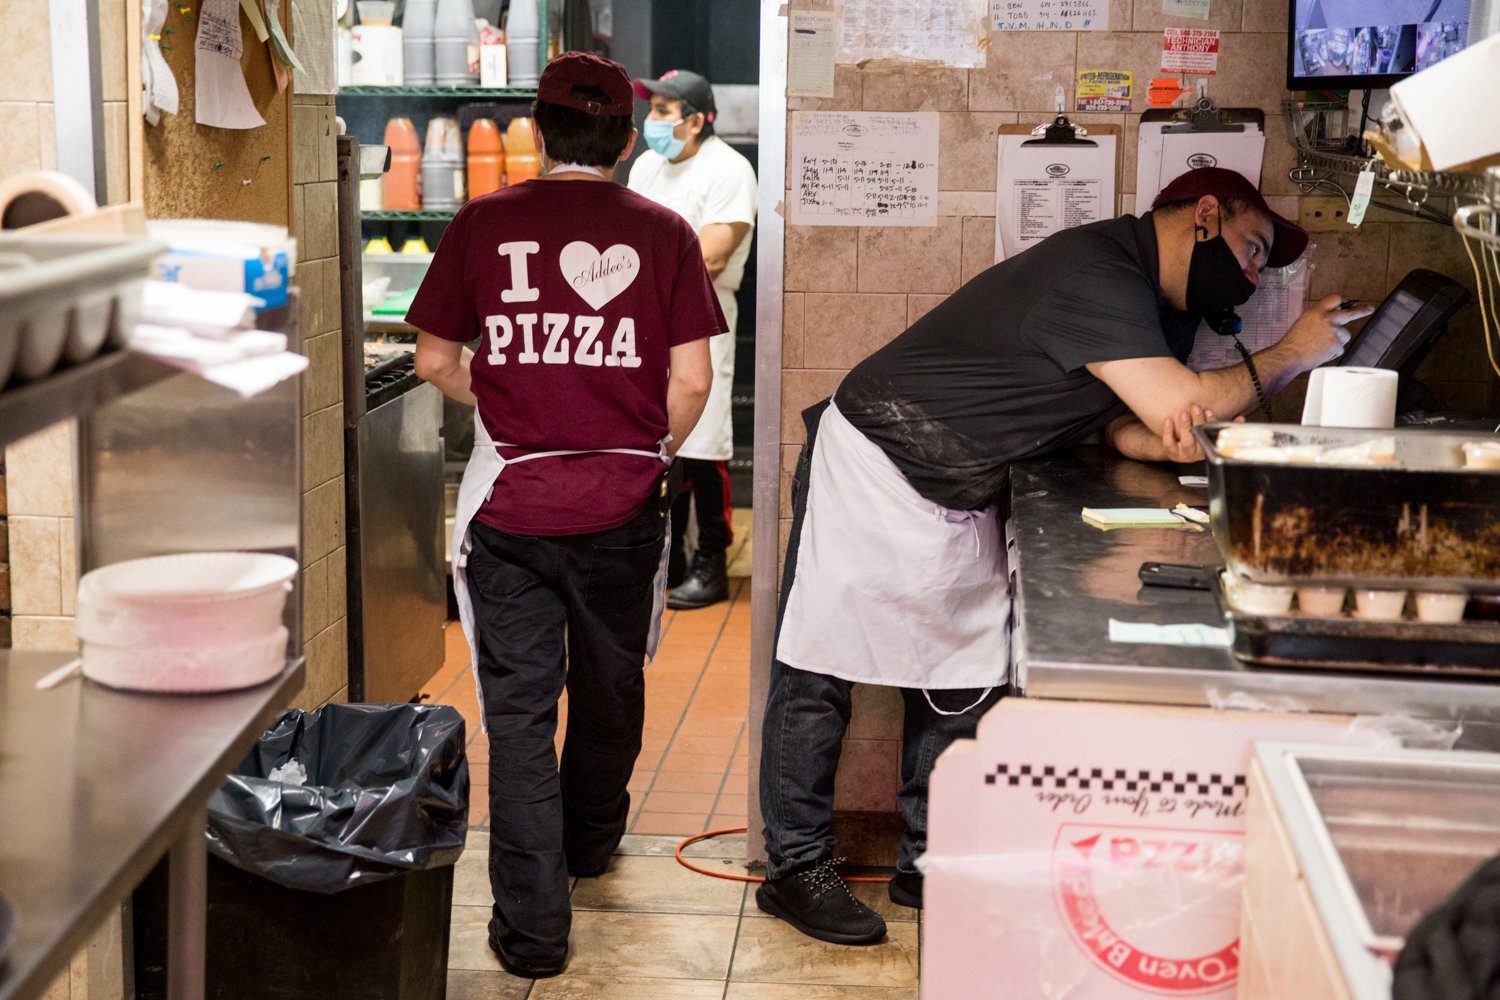 Jody DePasquale, manager of Addeo’s Riverdale Pizza, right, talks on the phone while filling an order shortly after opening. The North Riverdale pizza joint has managed to stay open when many others have shuttered, a consequence of the coronavirus pandemic.